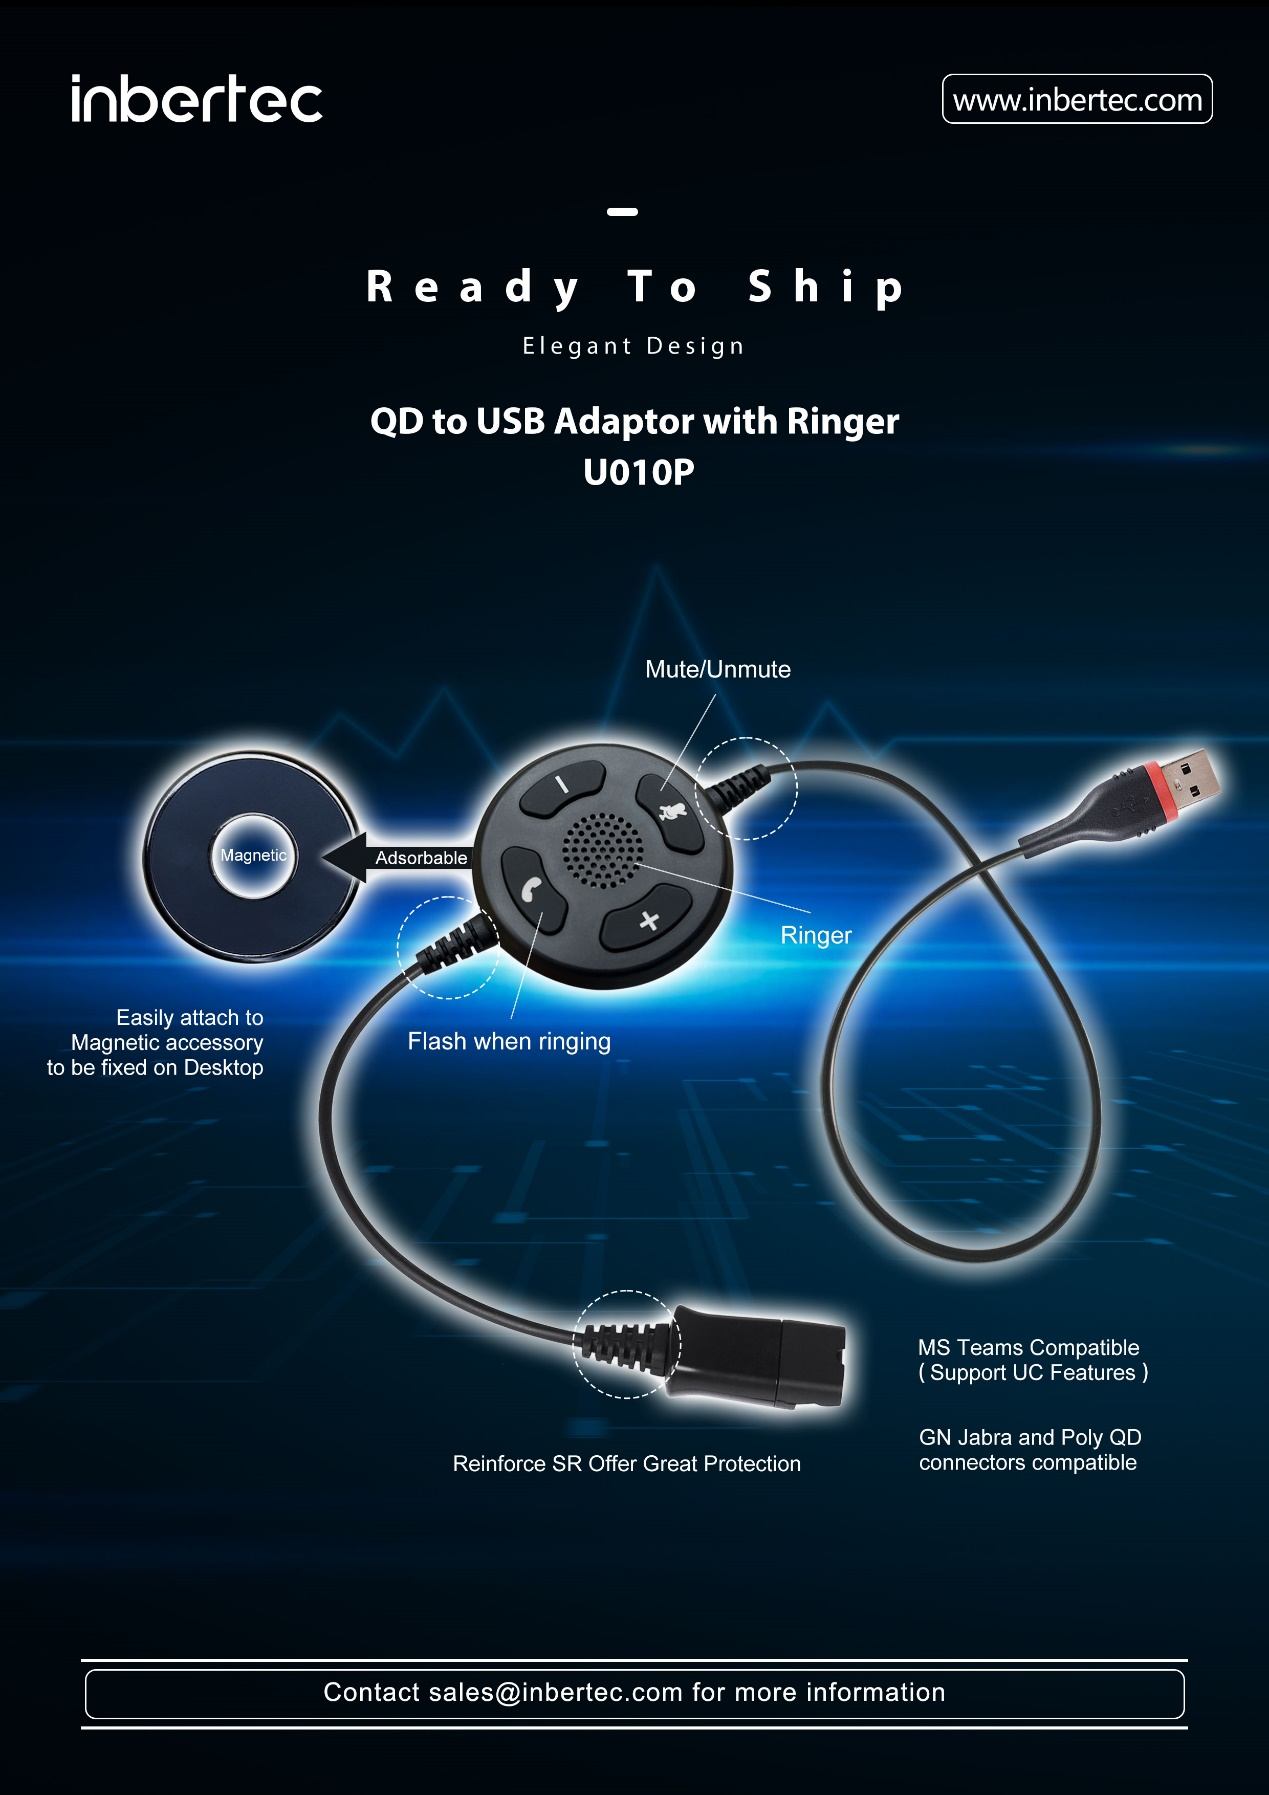 INBERTEC LAUNCHED THE NEW U010pm AND U010JM USB ADAPTOR WITH RINGER